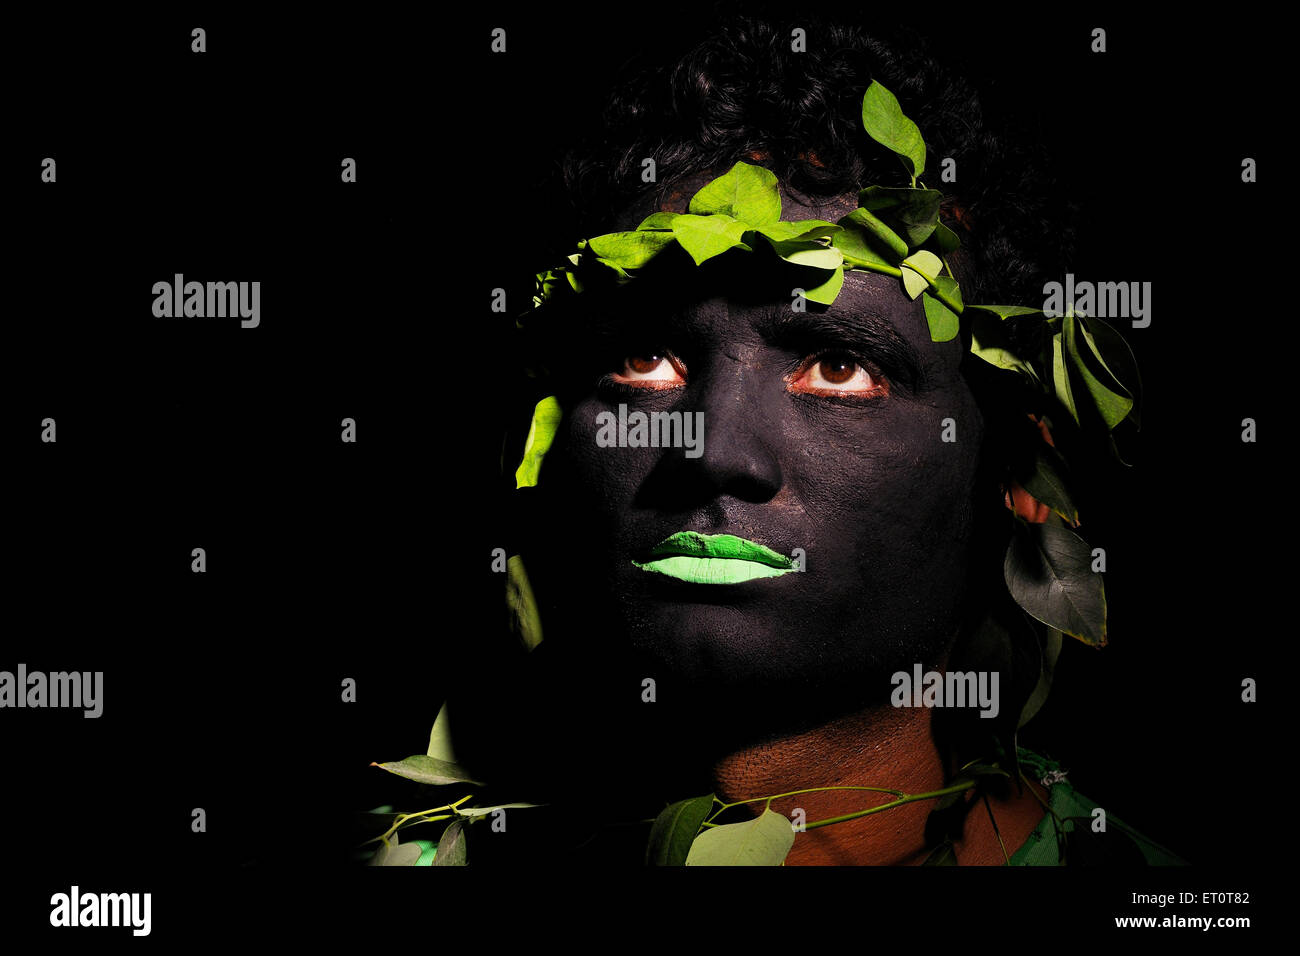 man camouflage disguise hide conceal tribal painted face MR#769G Stock Photo